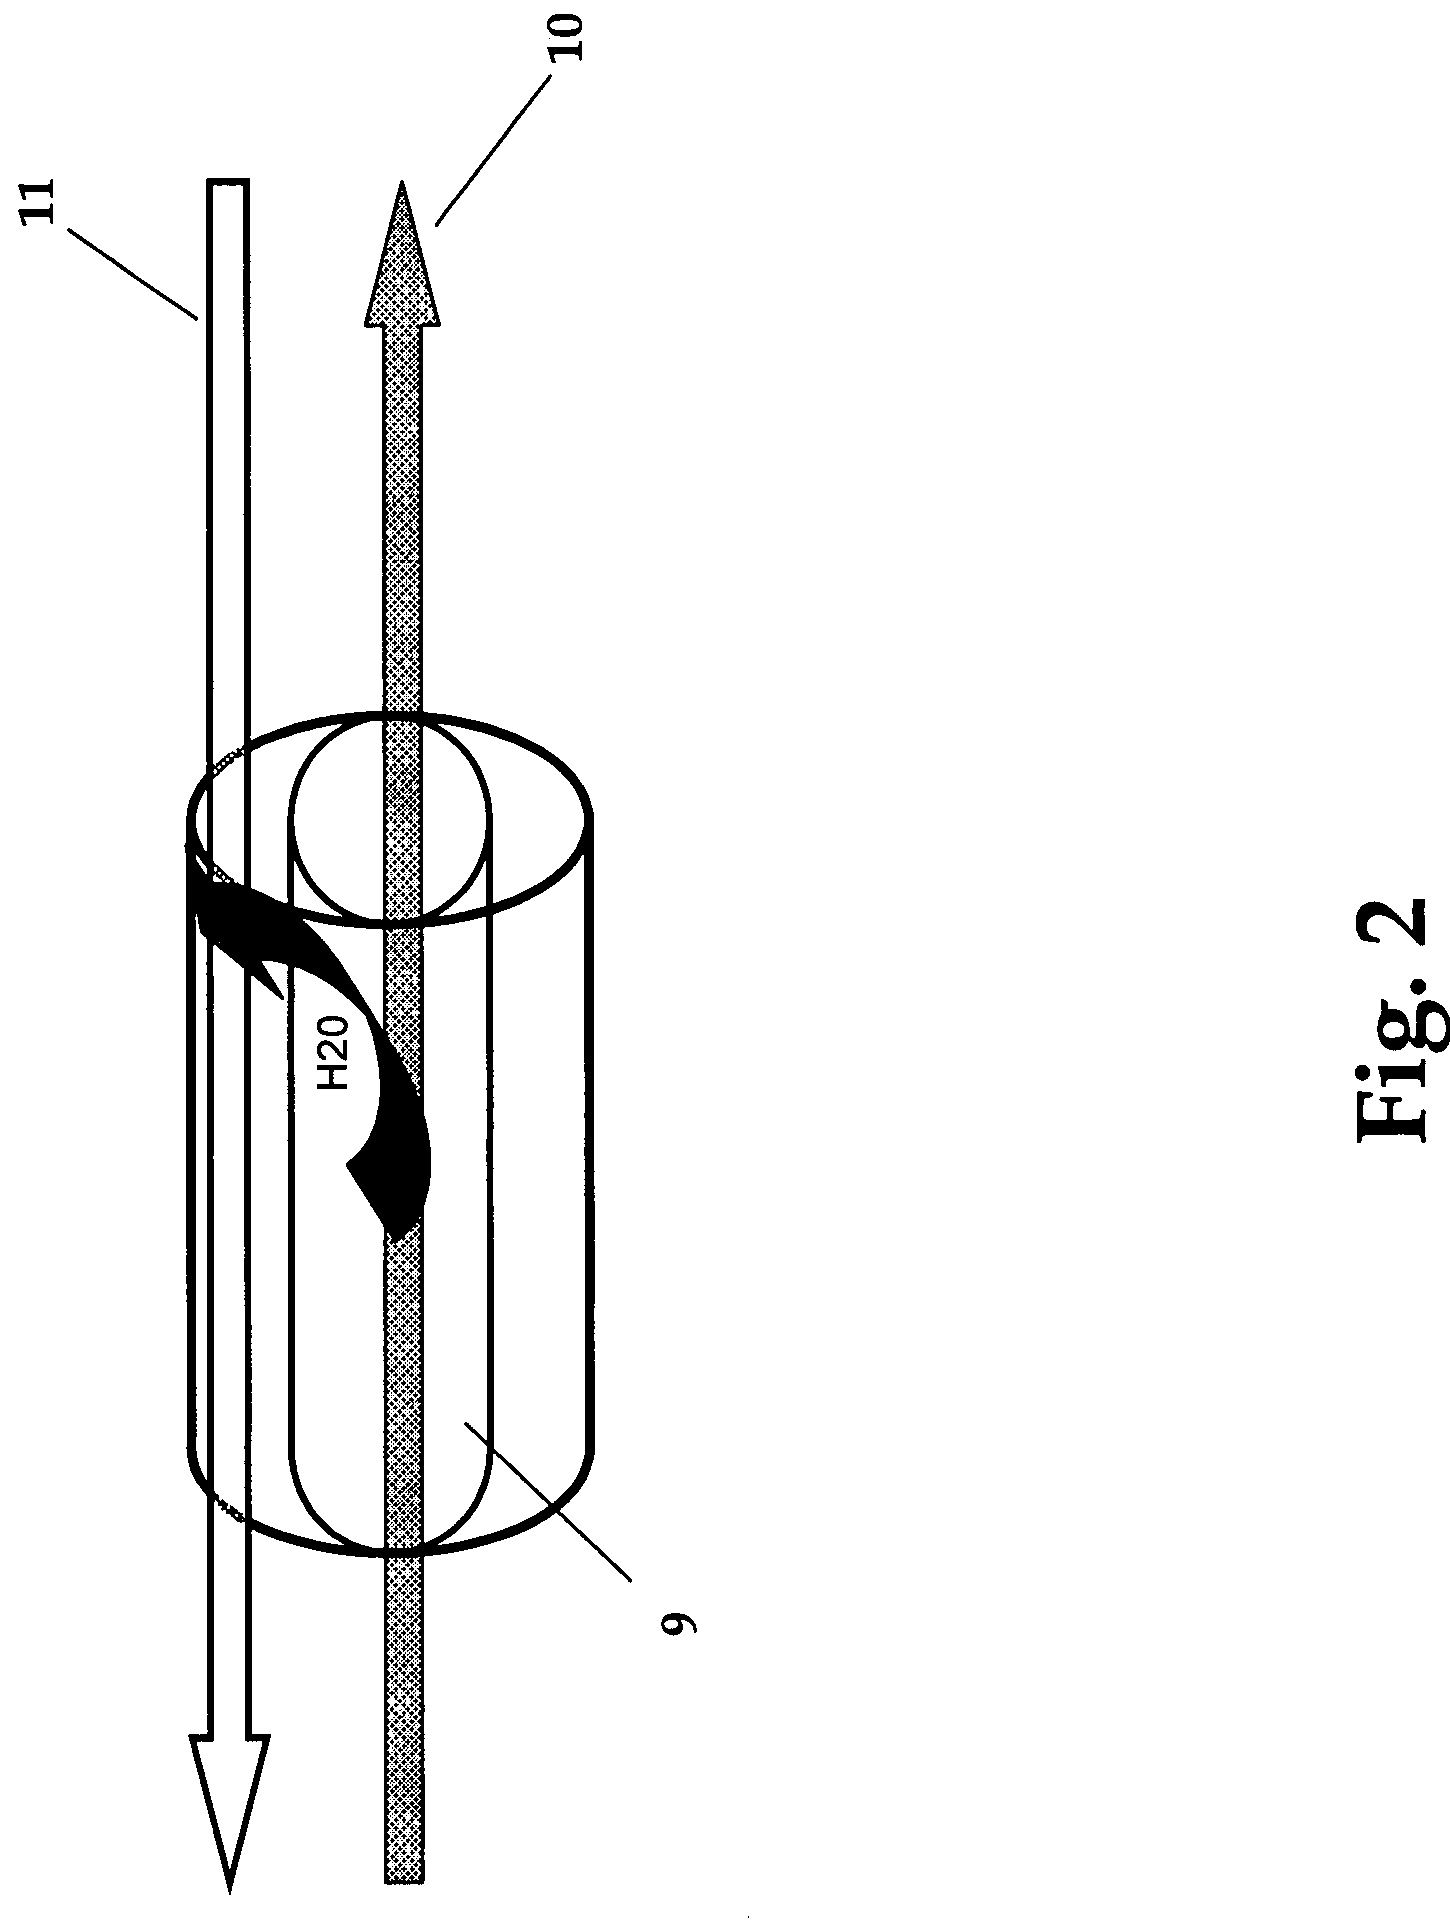 Gas concentrator with improved water rejection capability